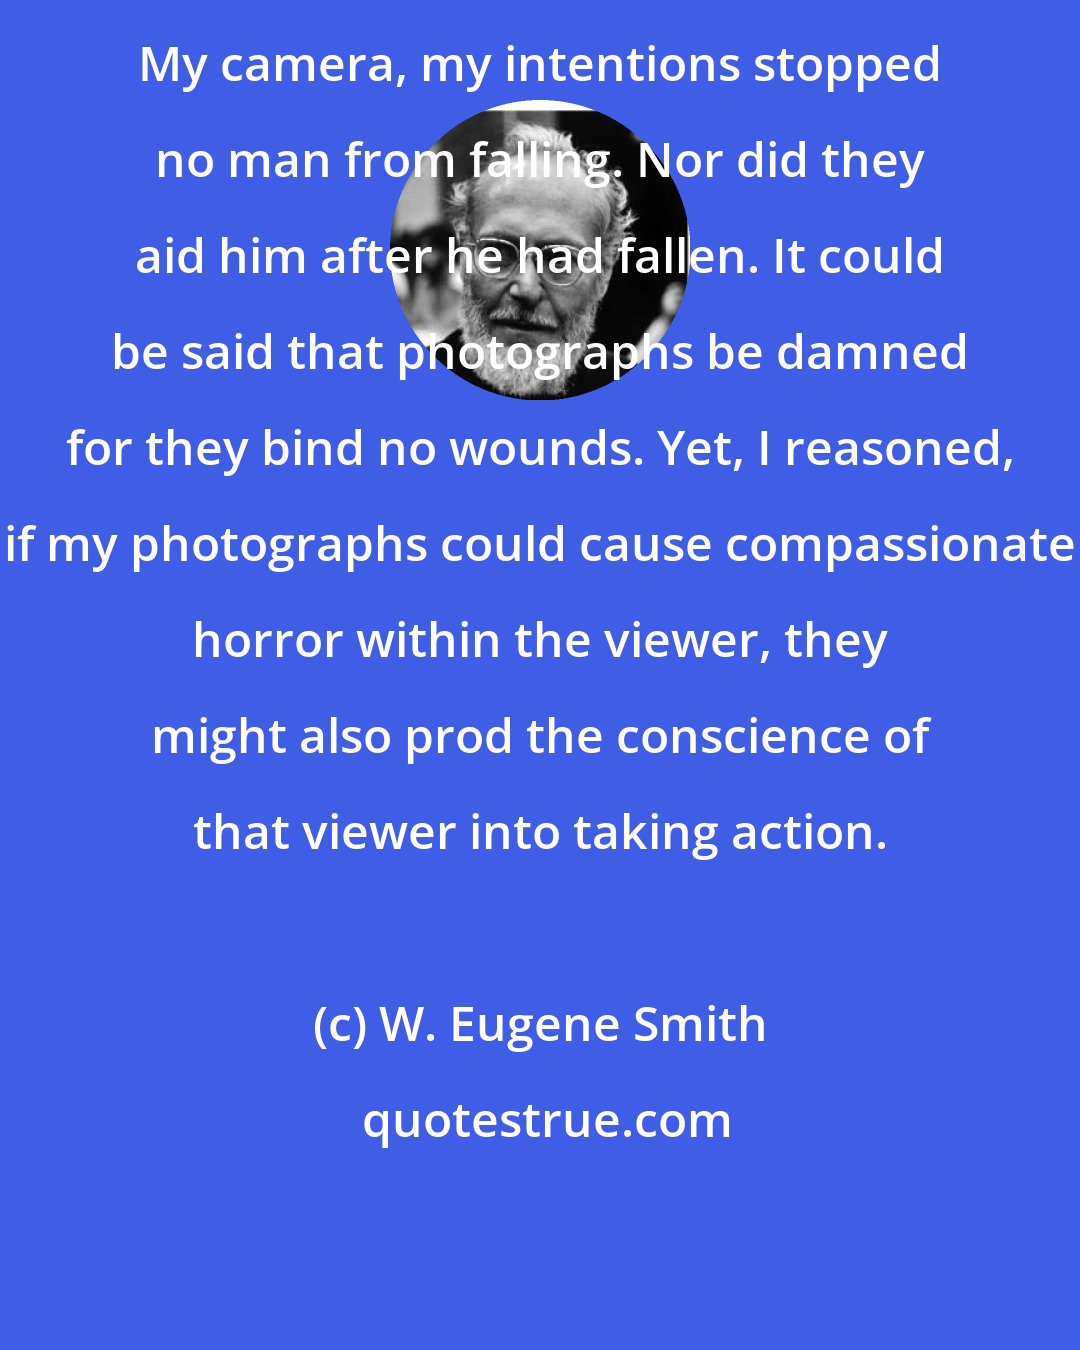 W. Eugene Smith: My camera, my intentions stopped no man from falling. Nor did they aid him after he had fallen. It could be said that photographs be damned for they bind no wounds. Yet, I reasoned, if my photographs could cause compassionate horror within the viewer, they might also prod the conscience of that viewer into taking action.